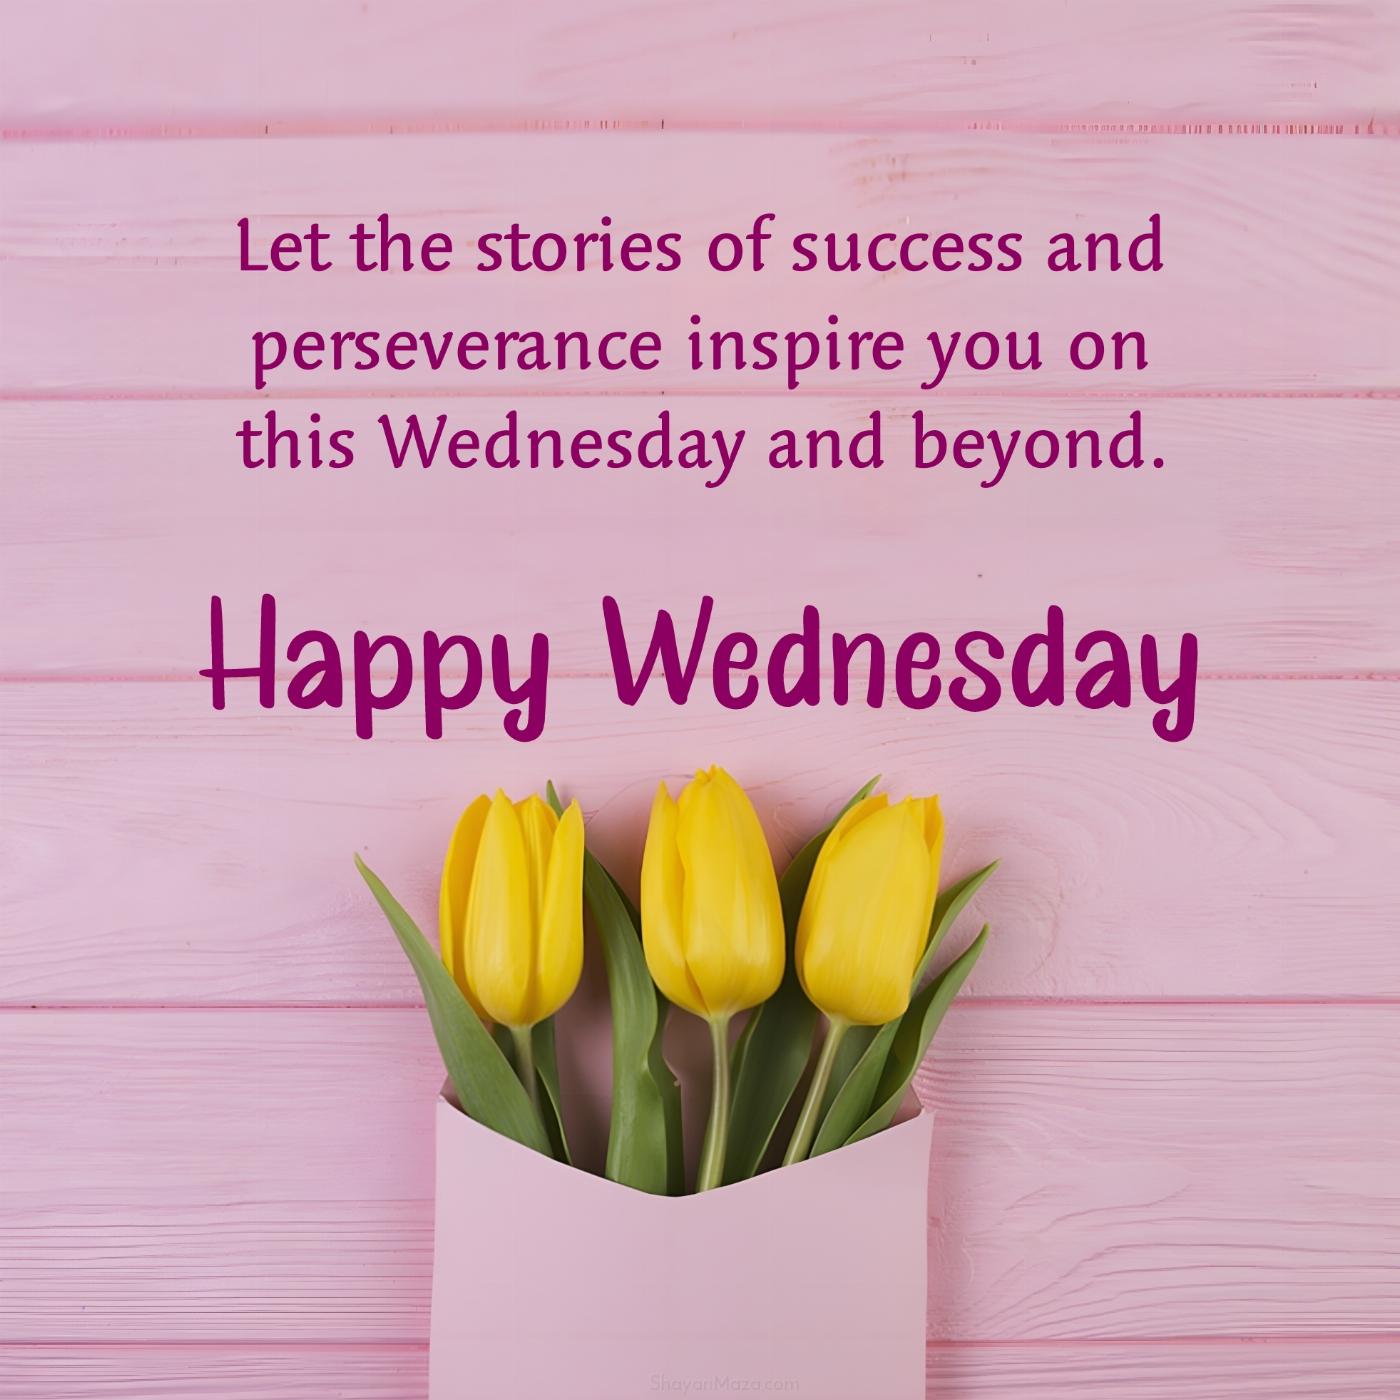 Let the stories of success and perseverance inspire you on this Wednesday